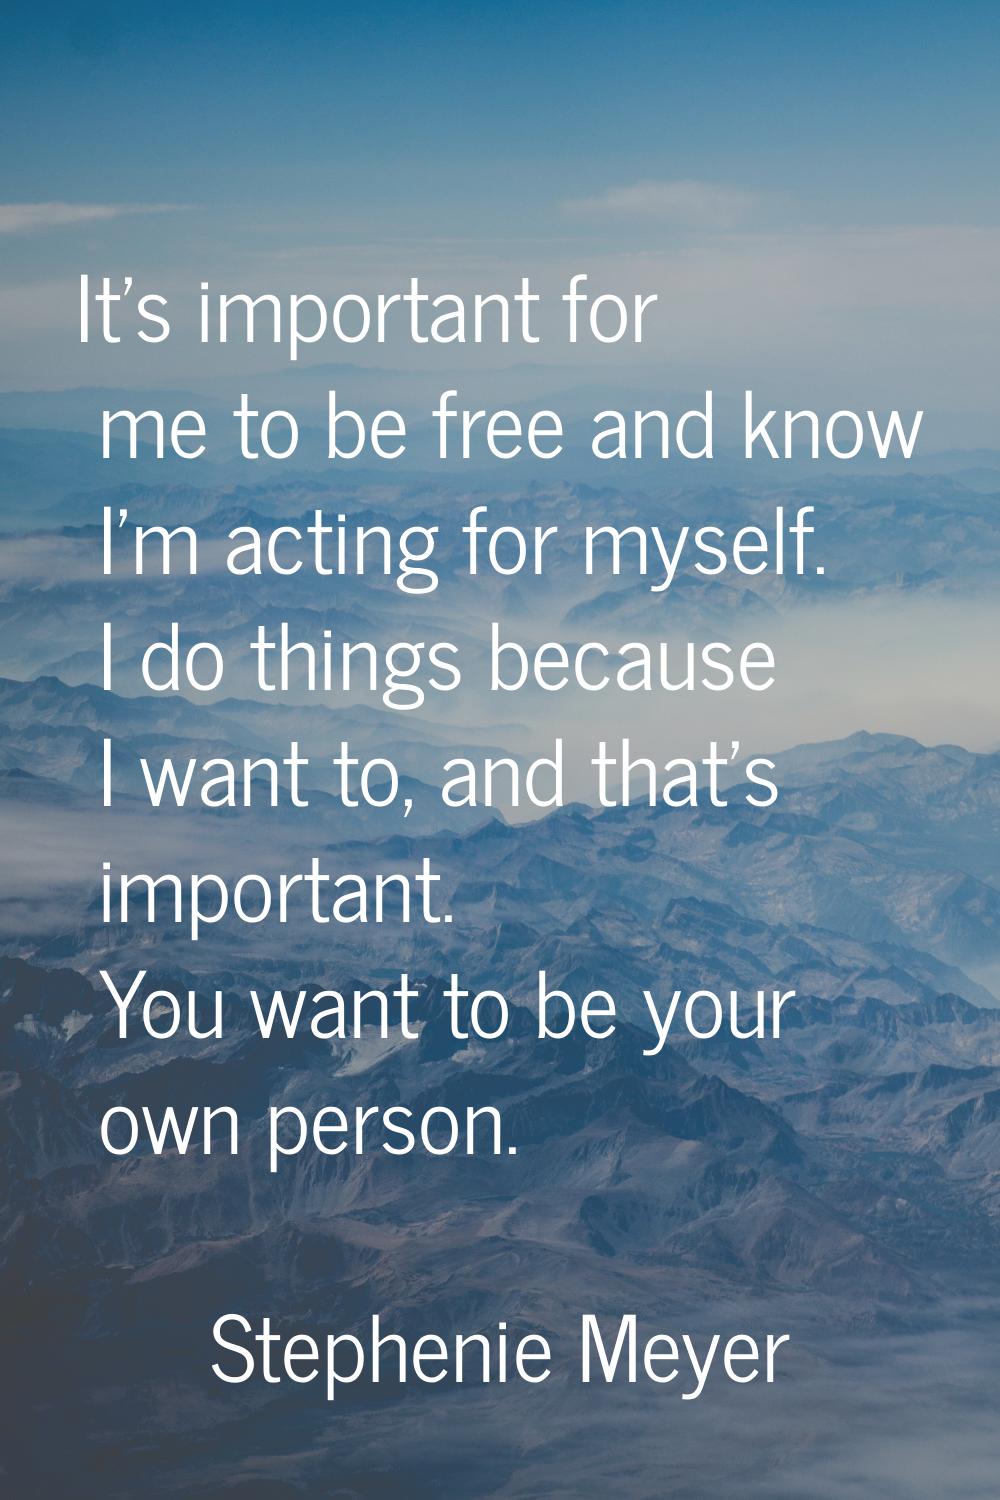 It's important for me to be free and know I'm acting for myself. I do things because I want to, and